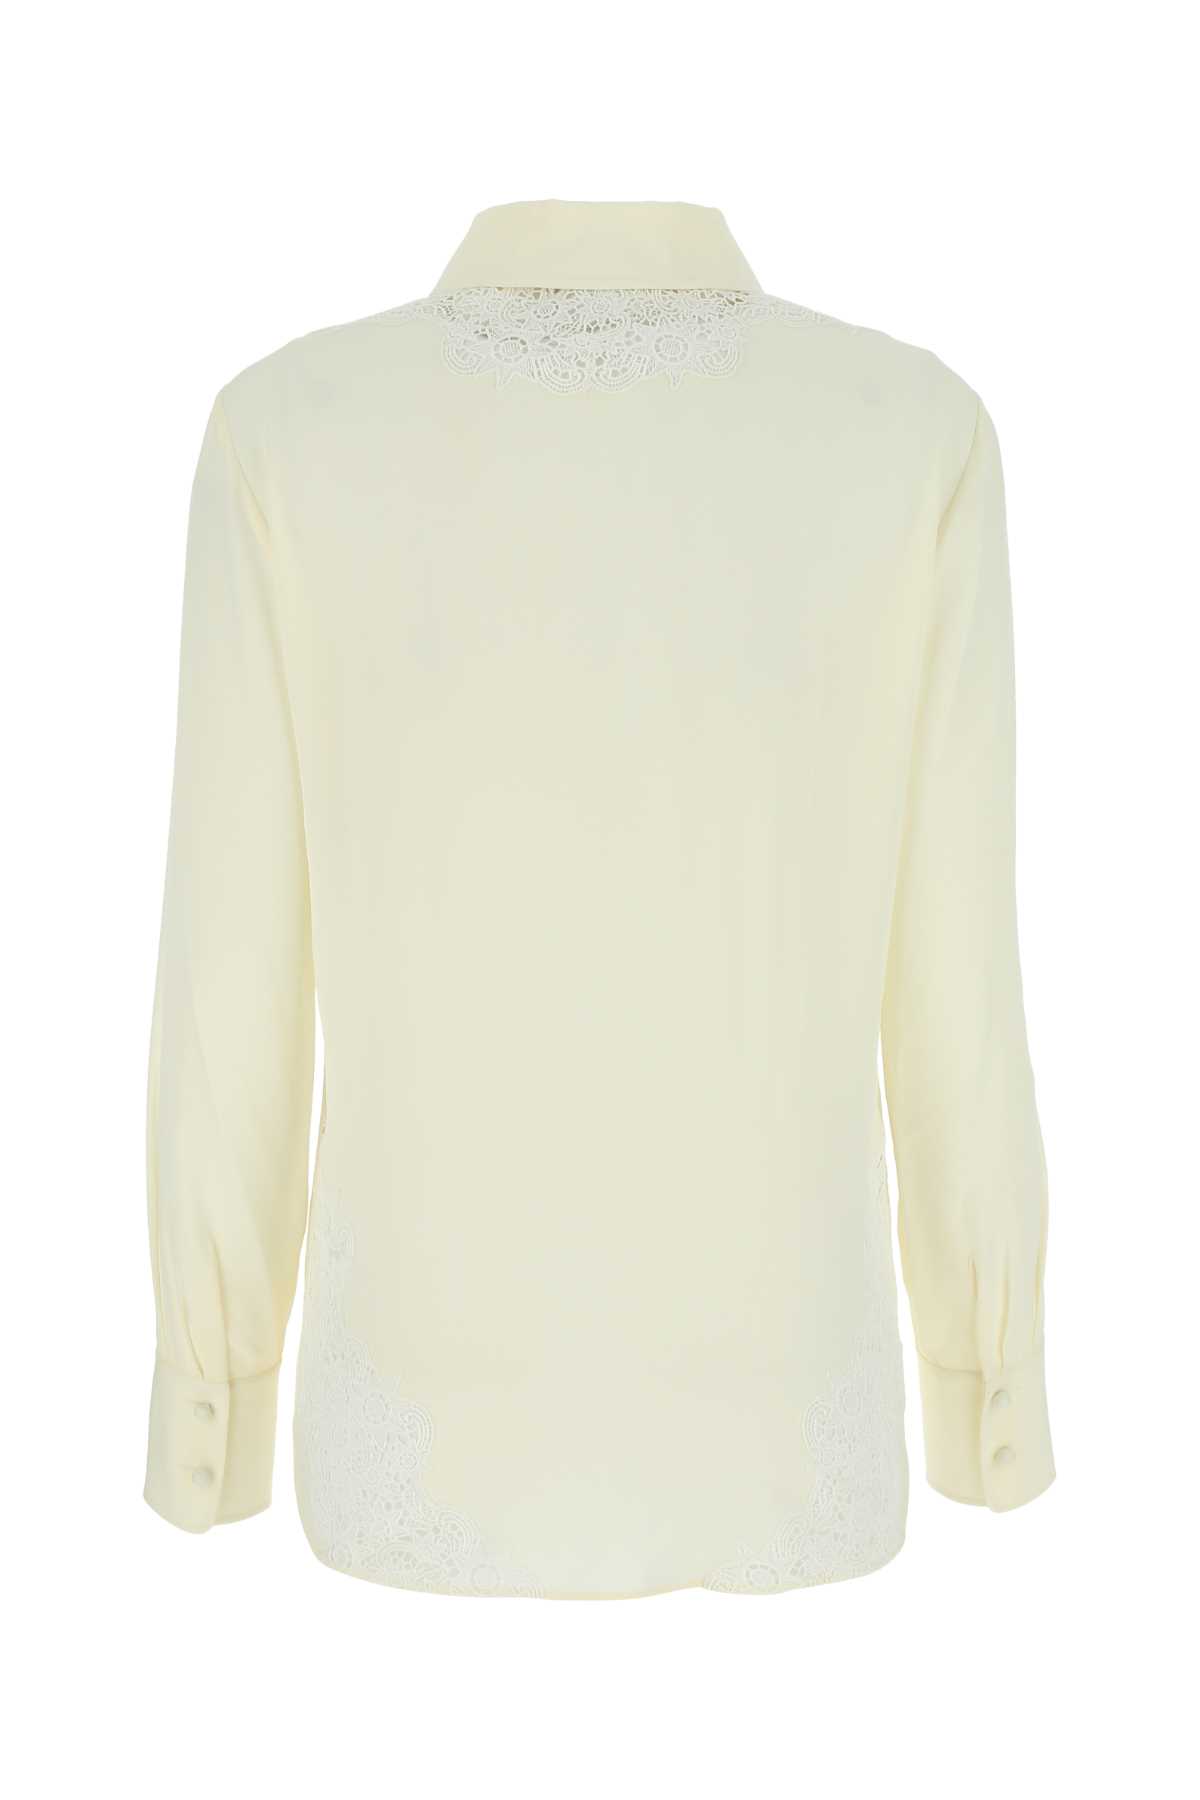 Chloé Ivory Crepe Shirt In 103